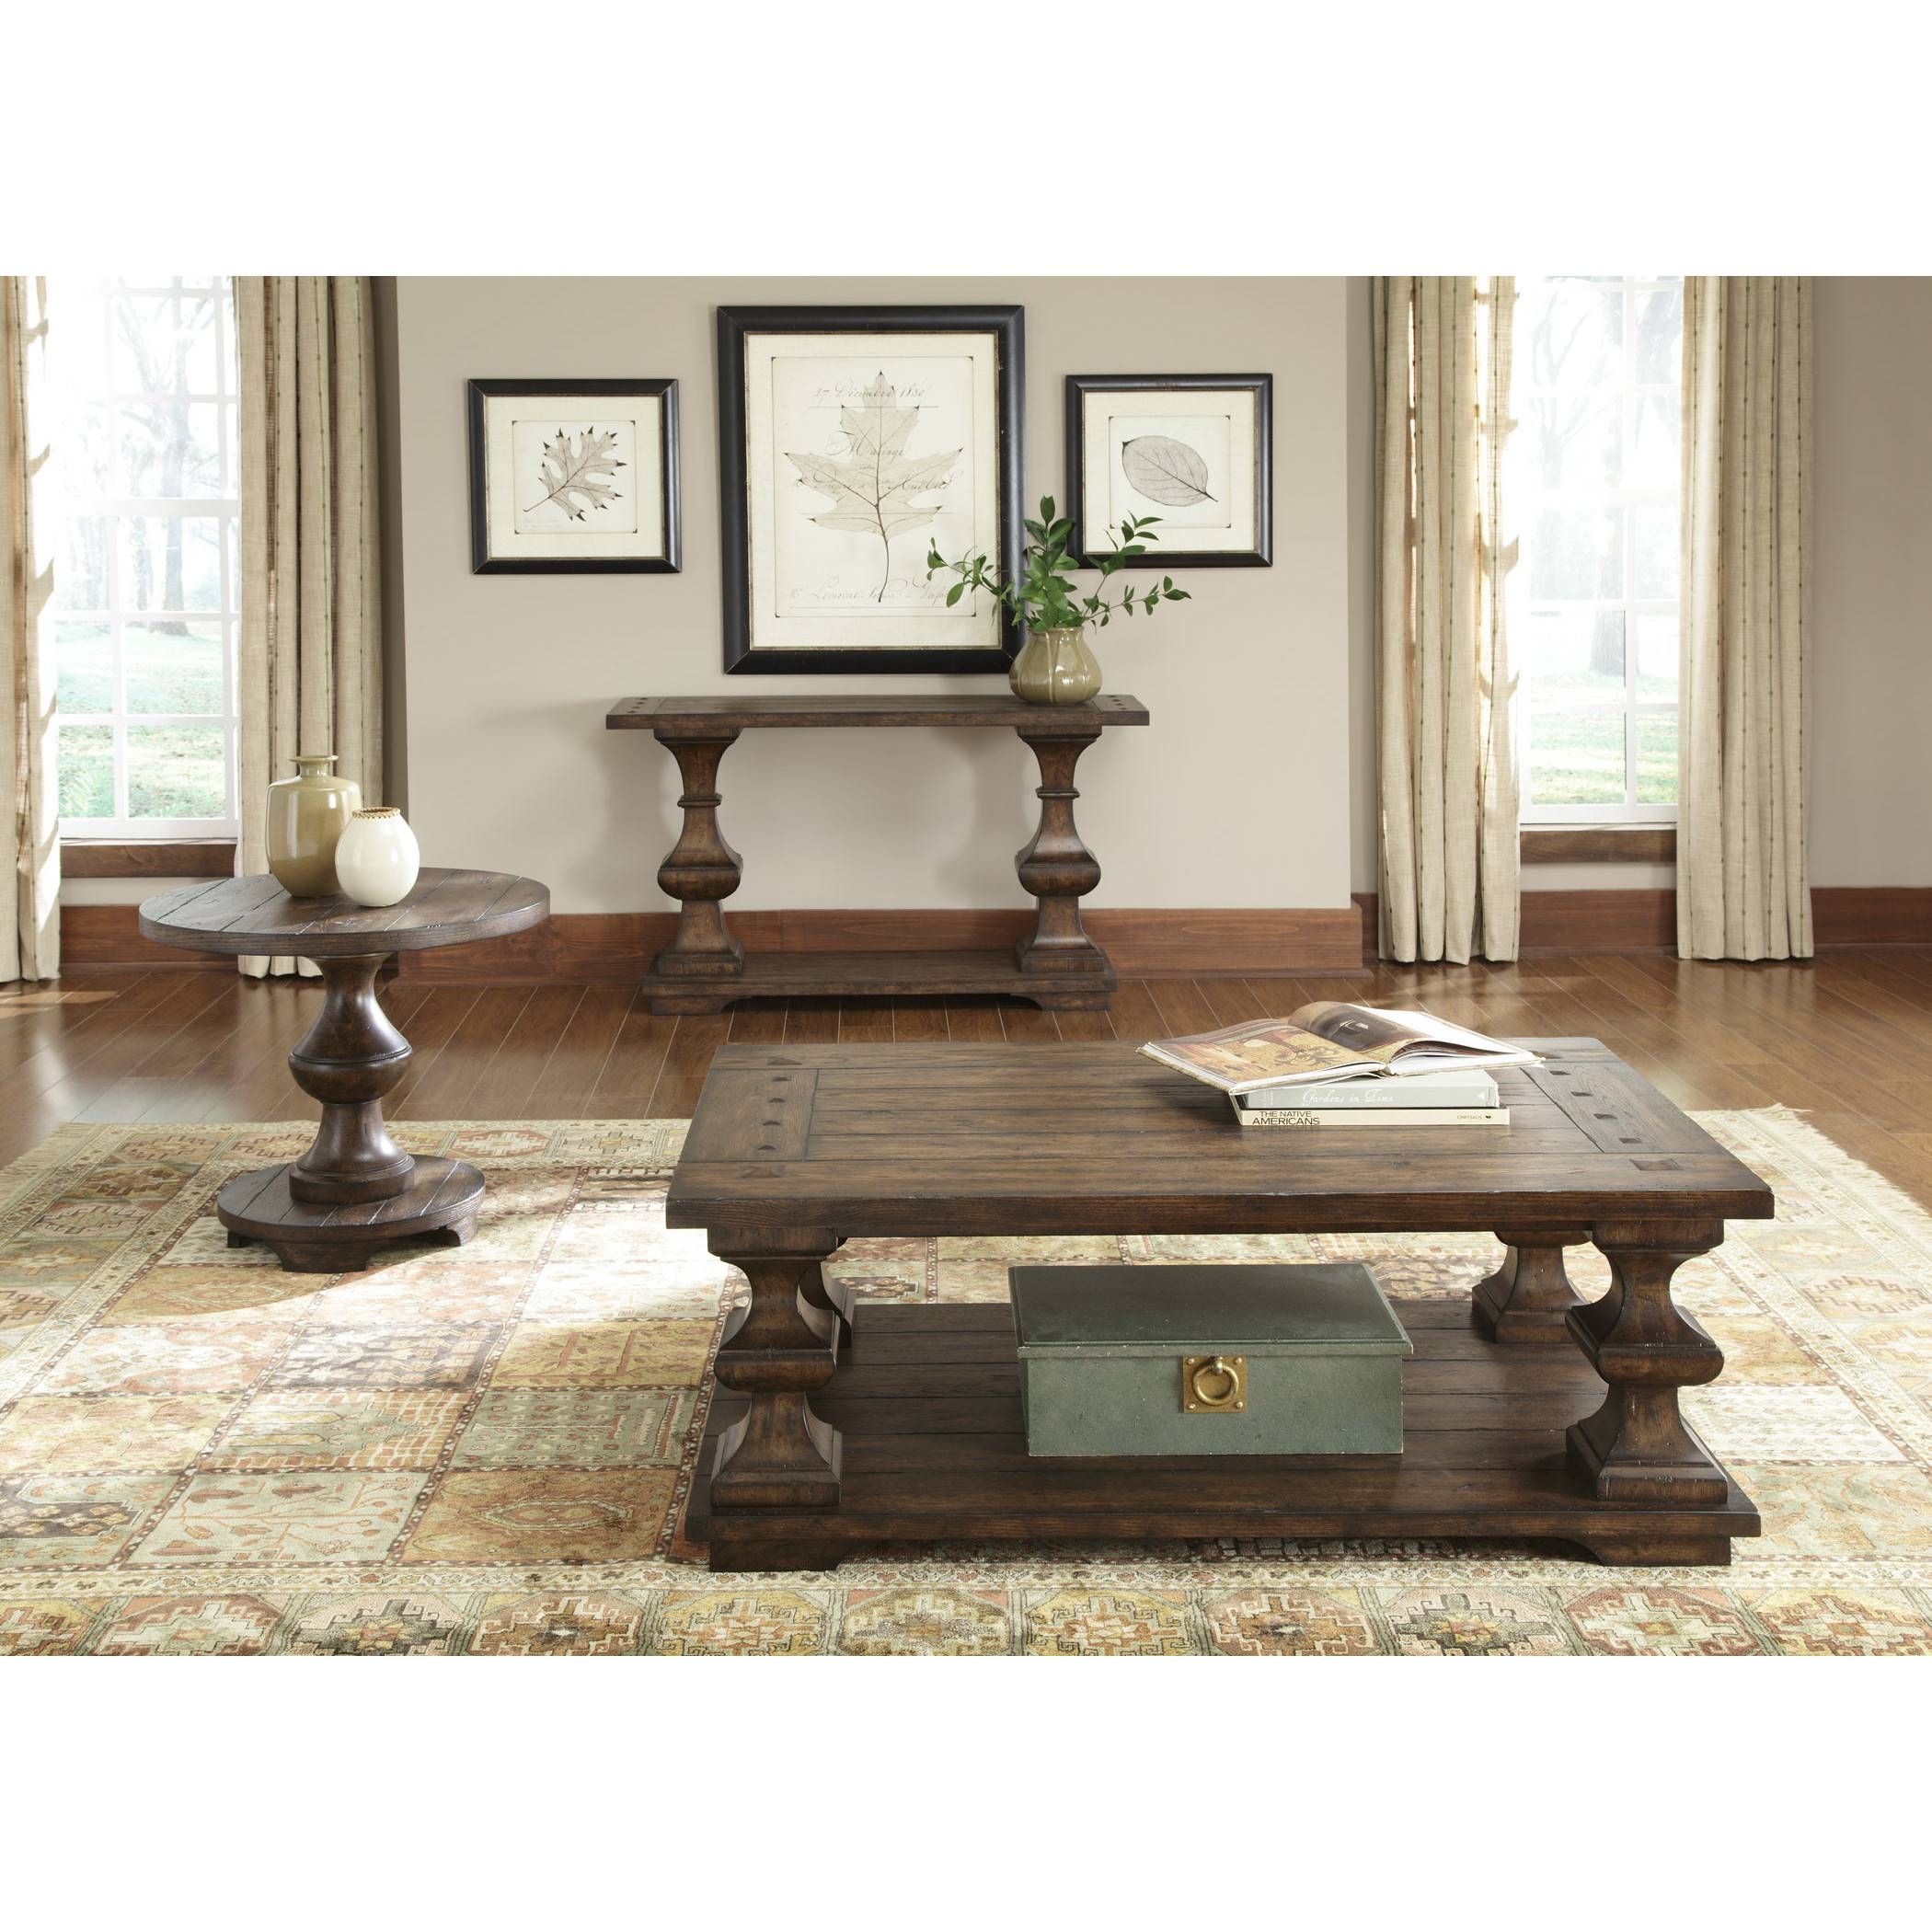 Furniture: Appealing Wayfair Console Table For Home Furniture Intended For Wayfair Coffee Tables (View 22 of 30)